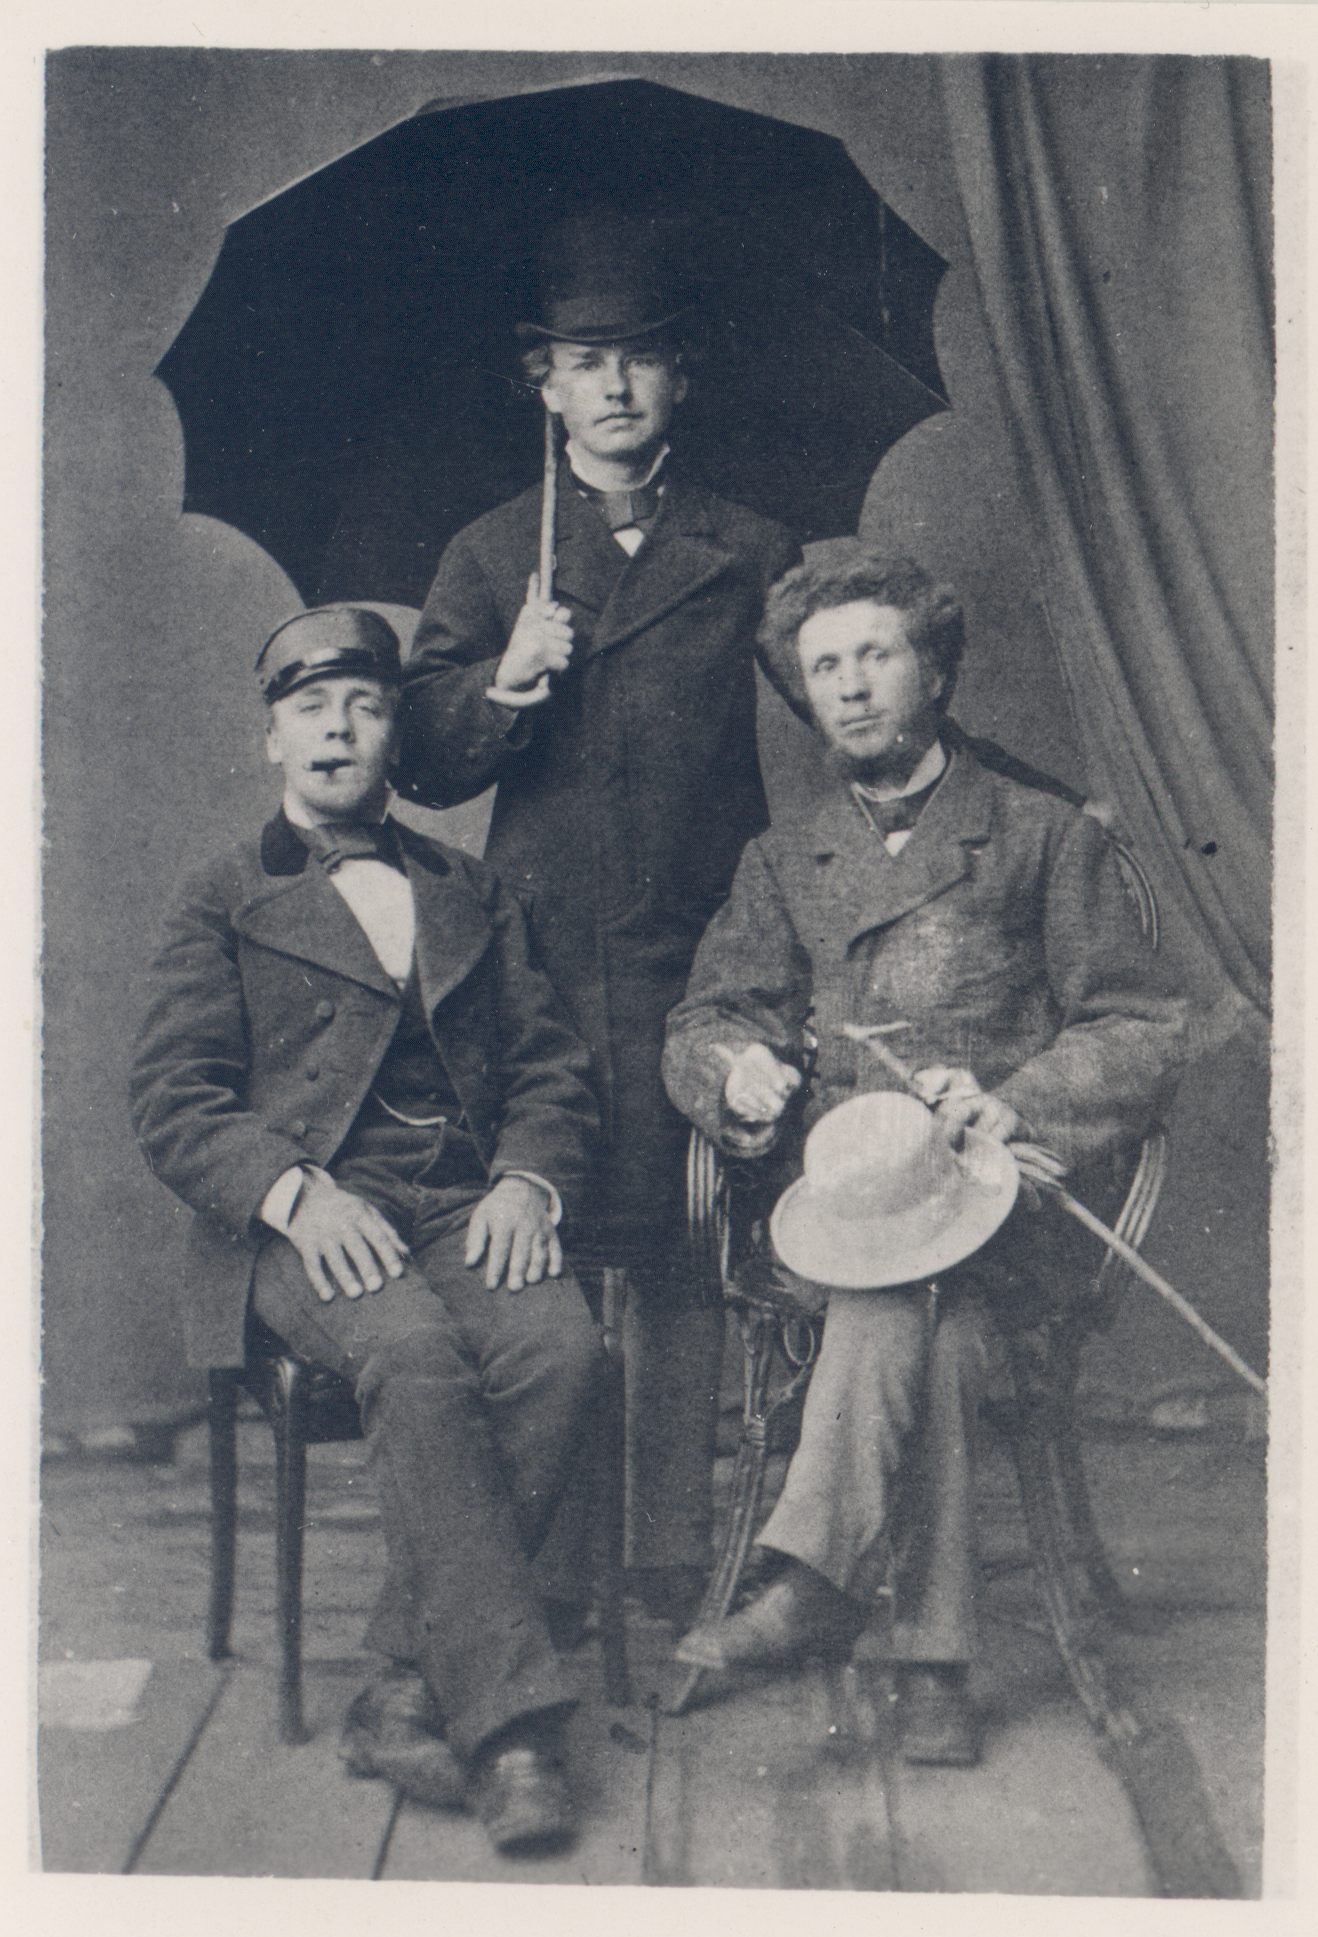 A. Kitzberg (in the middle) with friends from the Pöögle-Poll era